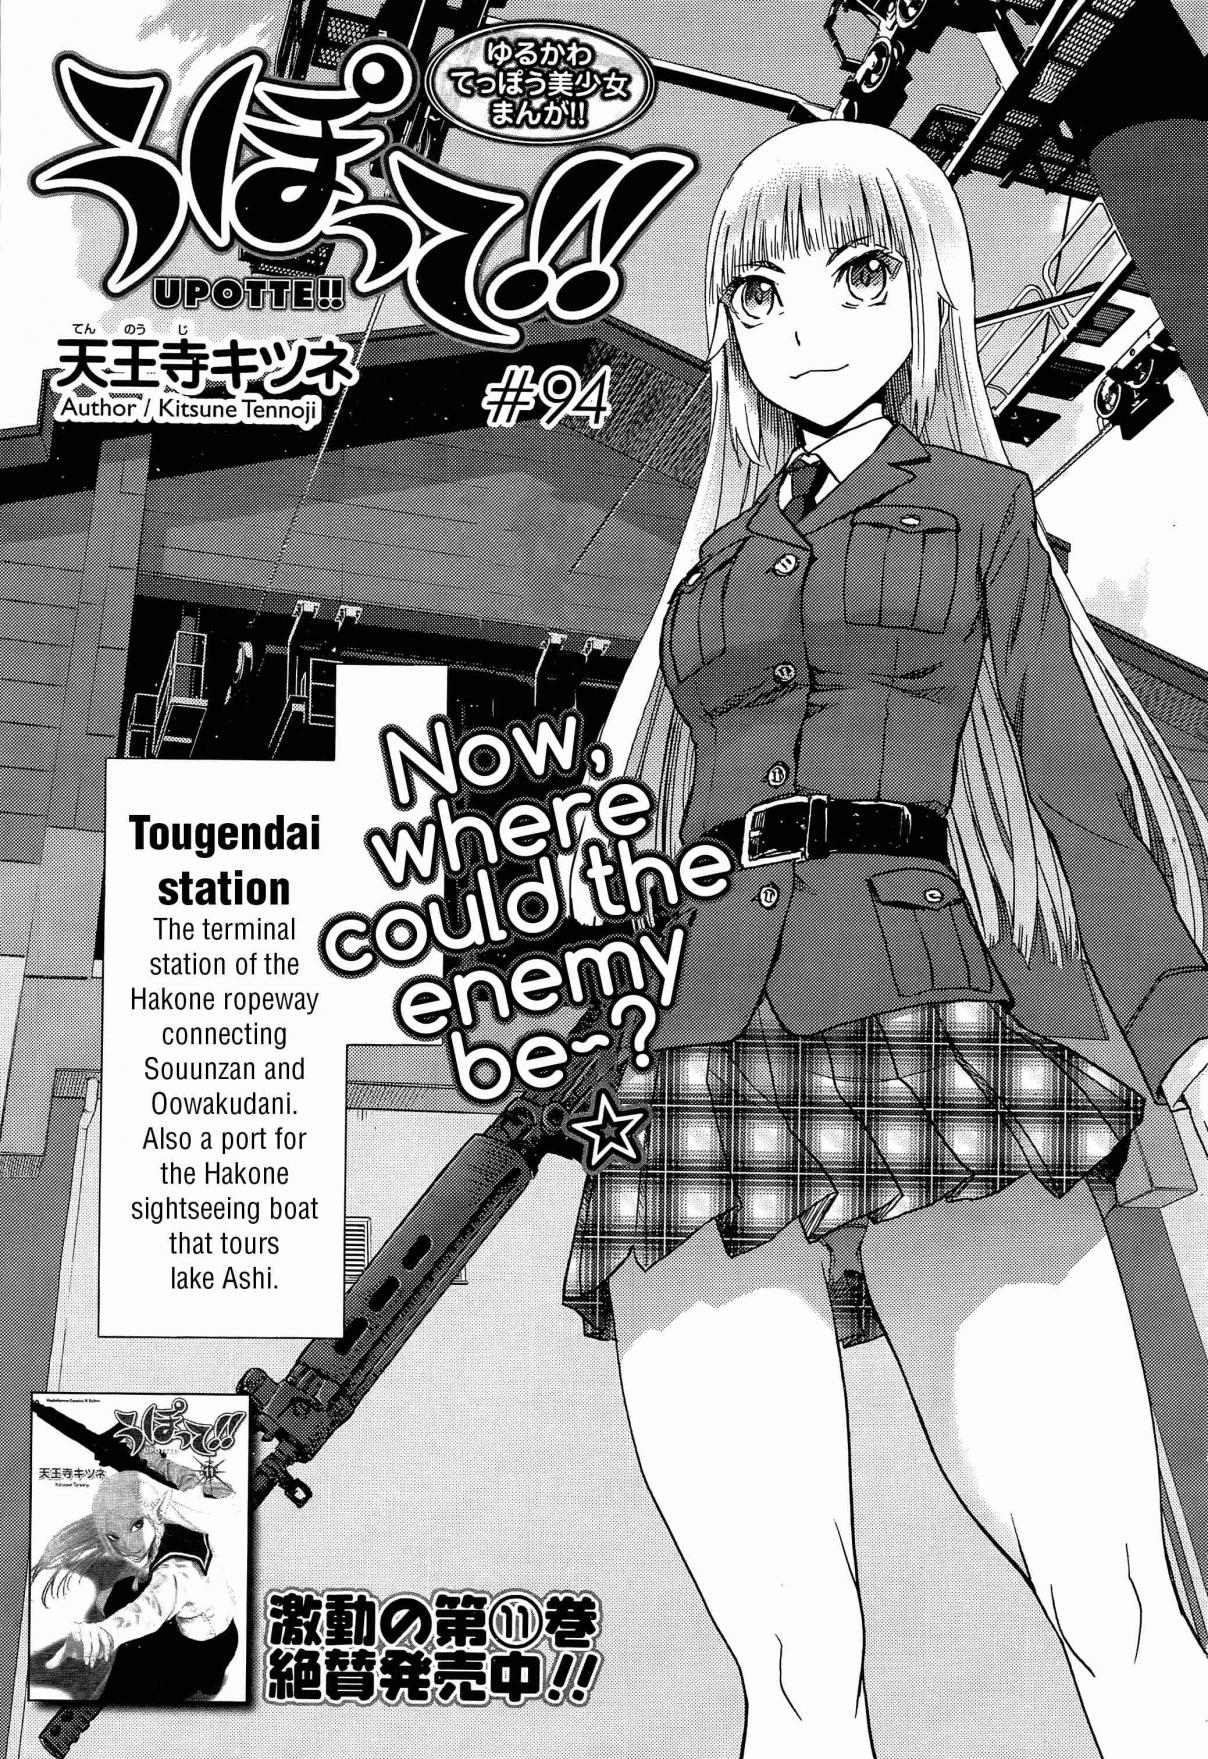 Upotte!! Vol. 12 Ch. 96 Now, where could the enemy be~? ☆